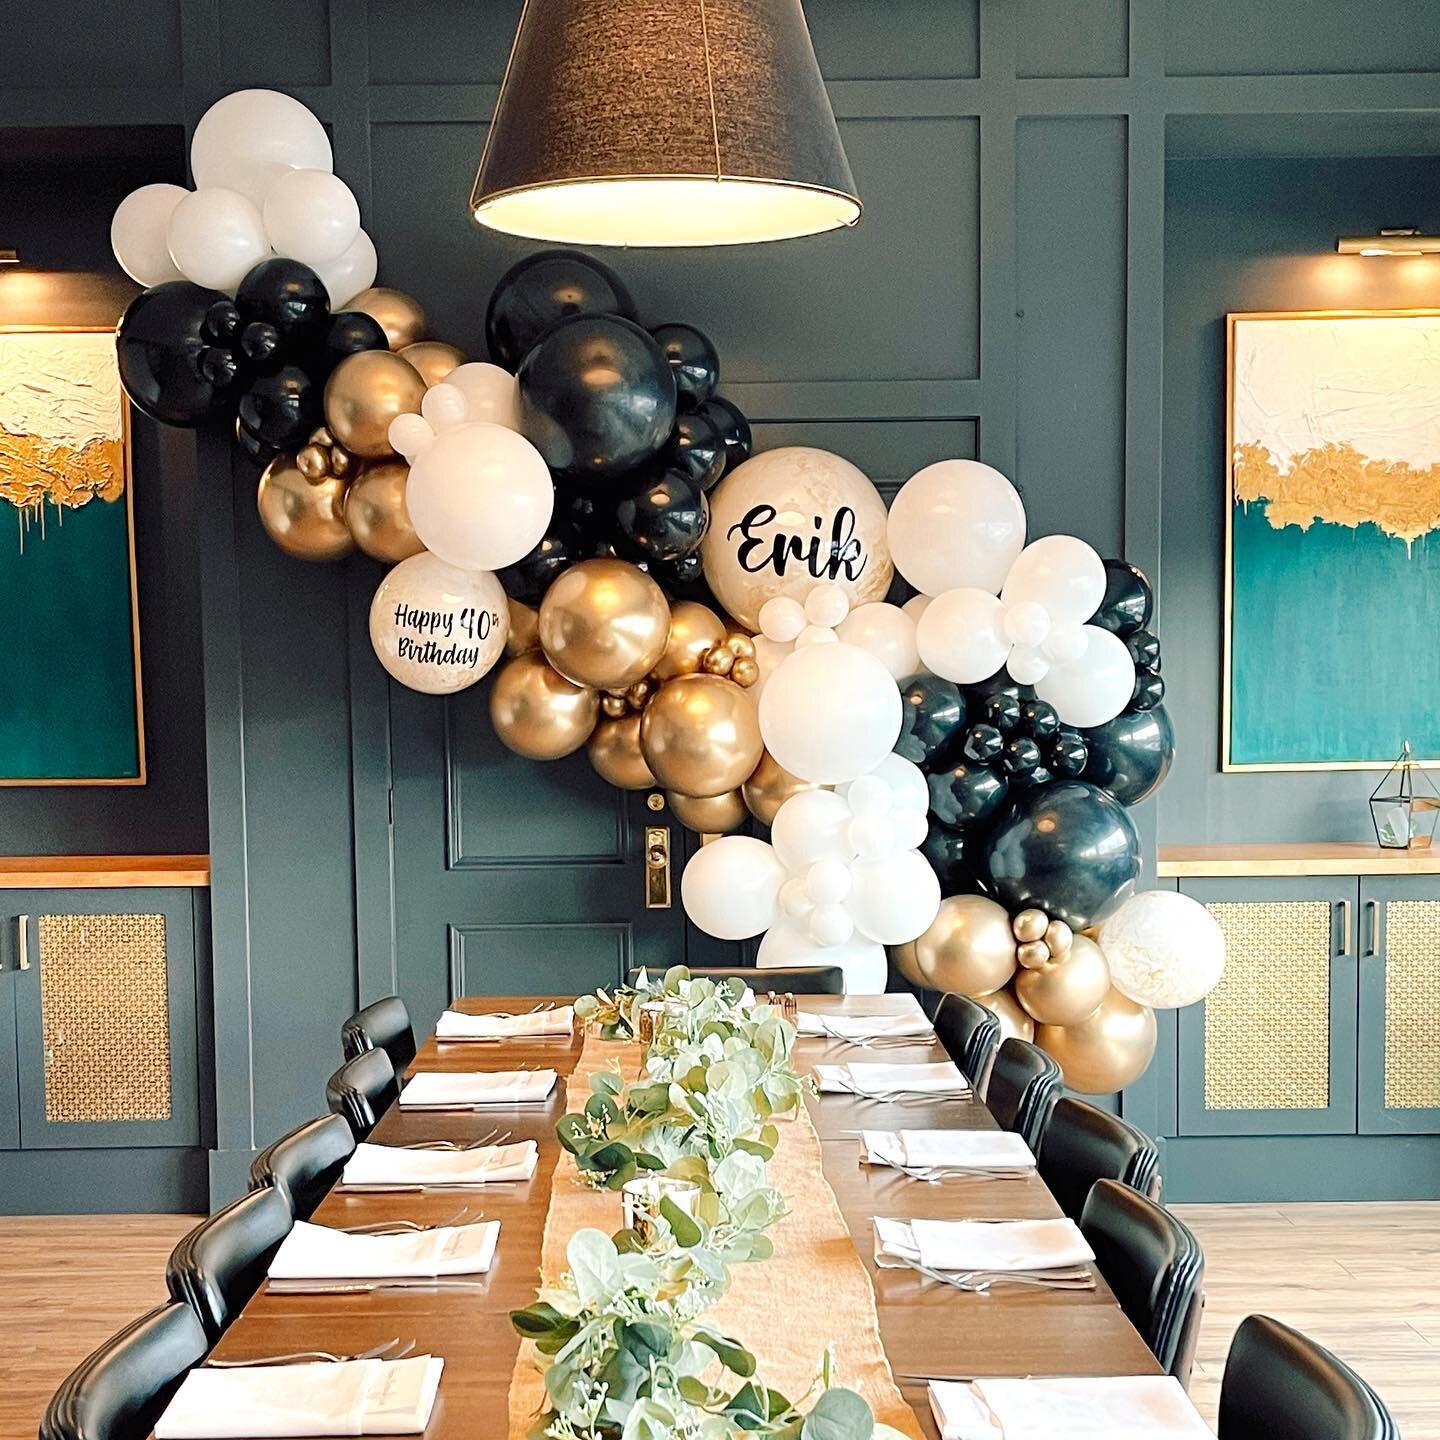 Whether you&rsquo;re having an intimate dinner or big celebration, let us help make it memorable! 

Fill out our inquiry form to get your party started. Link in our bio. 
.
.
.
.
.
.
.
.
.
.
.
.
#Balloon | #balloons |  #foilballoon |#balloongarland |